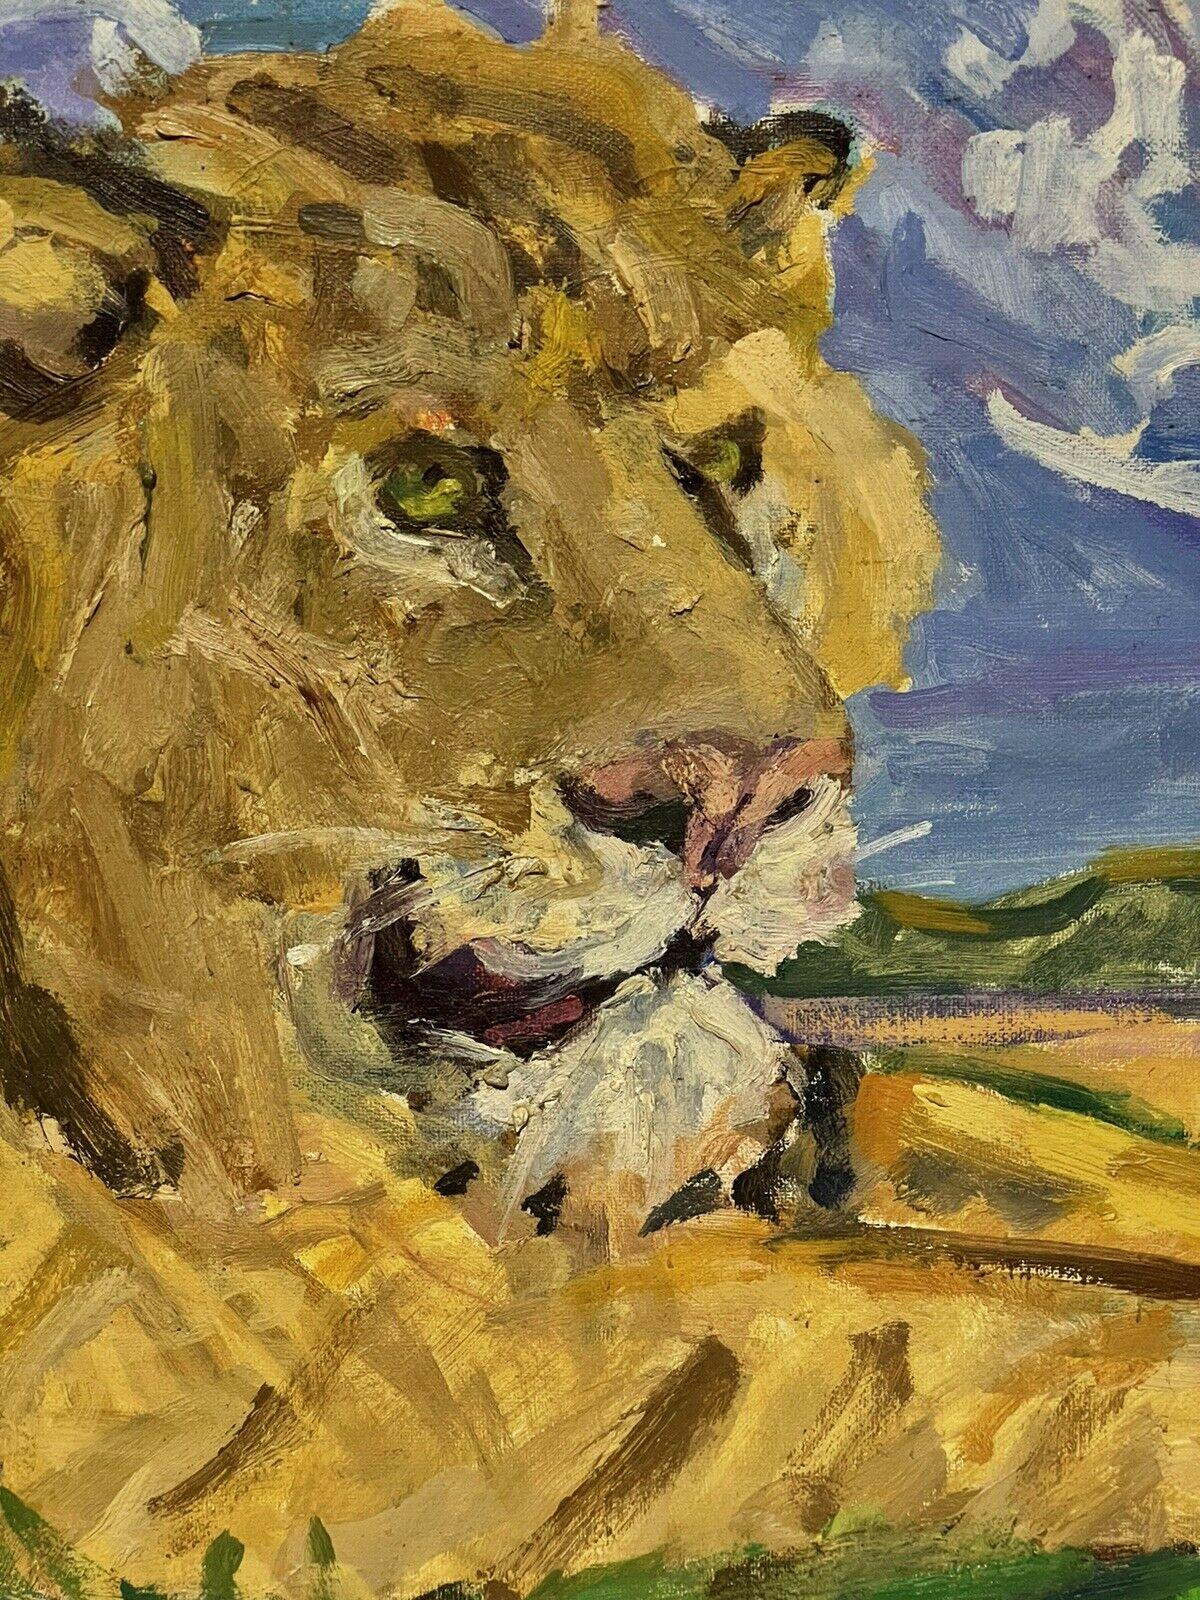 Artist/ School/ Date:
Douglas Stuart Allen (American/ French 1923-2021)
American born artist from Chicago, retiring to France during his latter years to become a full time painter.

Title: The Lion

Medium: oil painting on canvas, unframed

Size: 